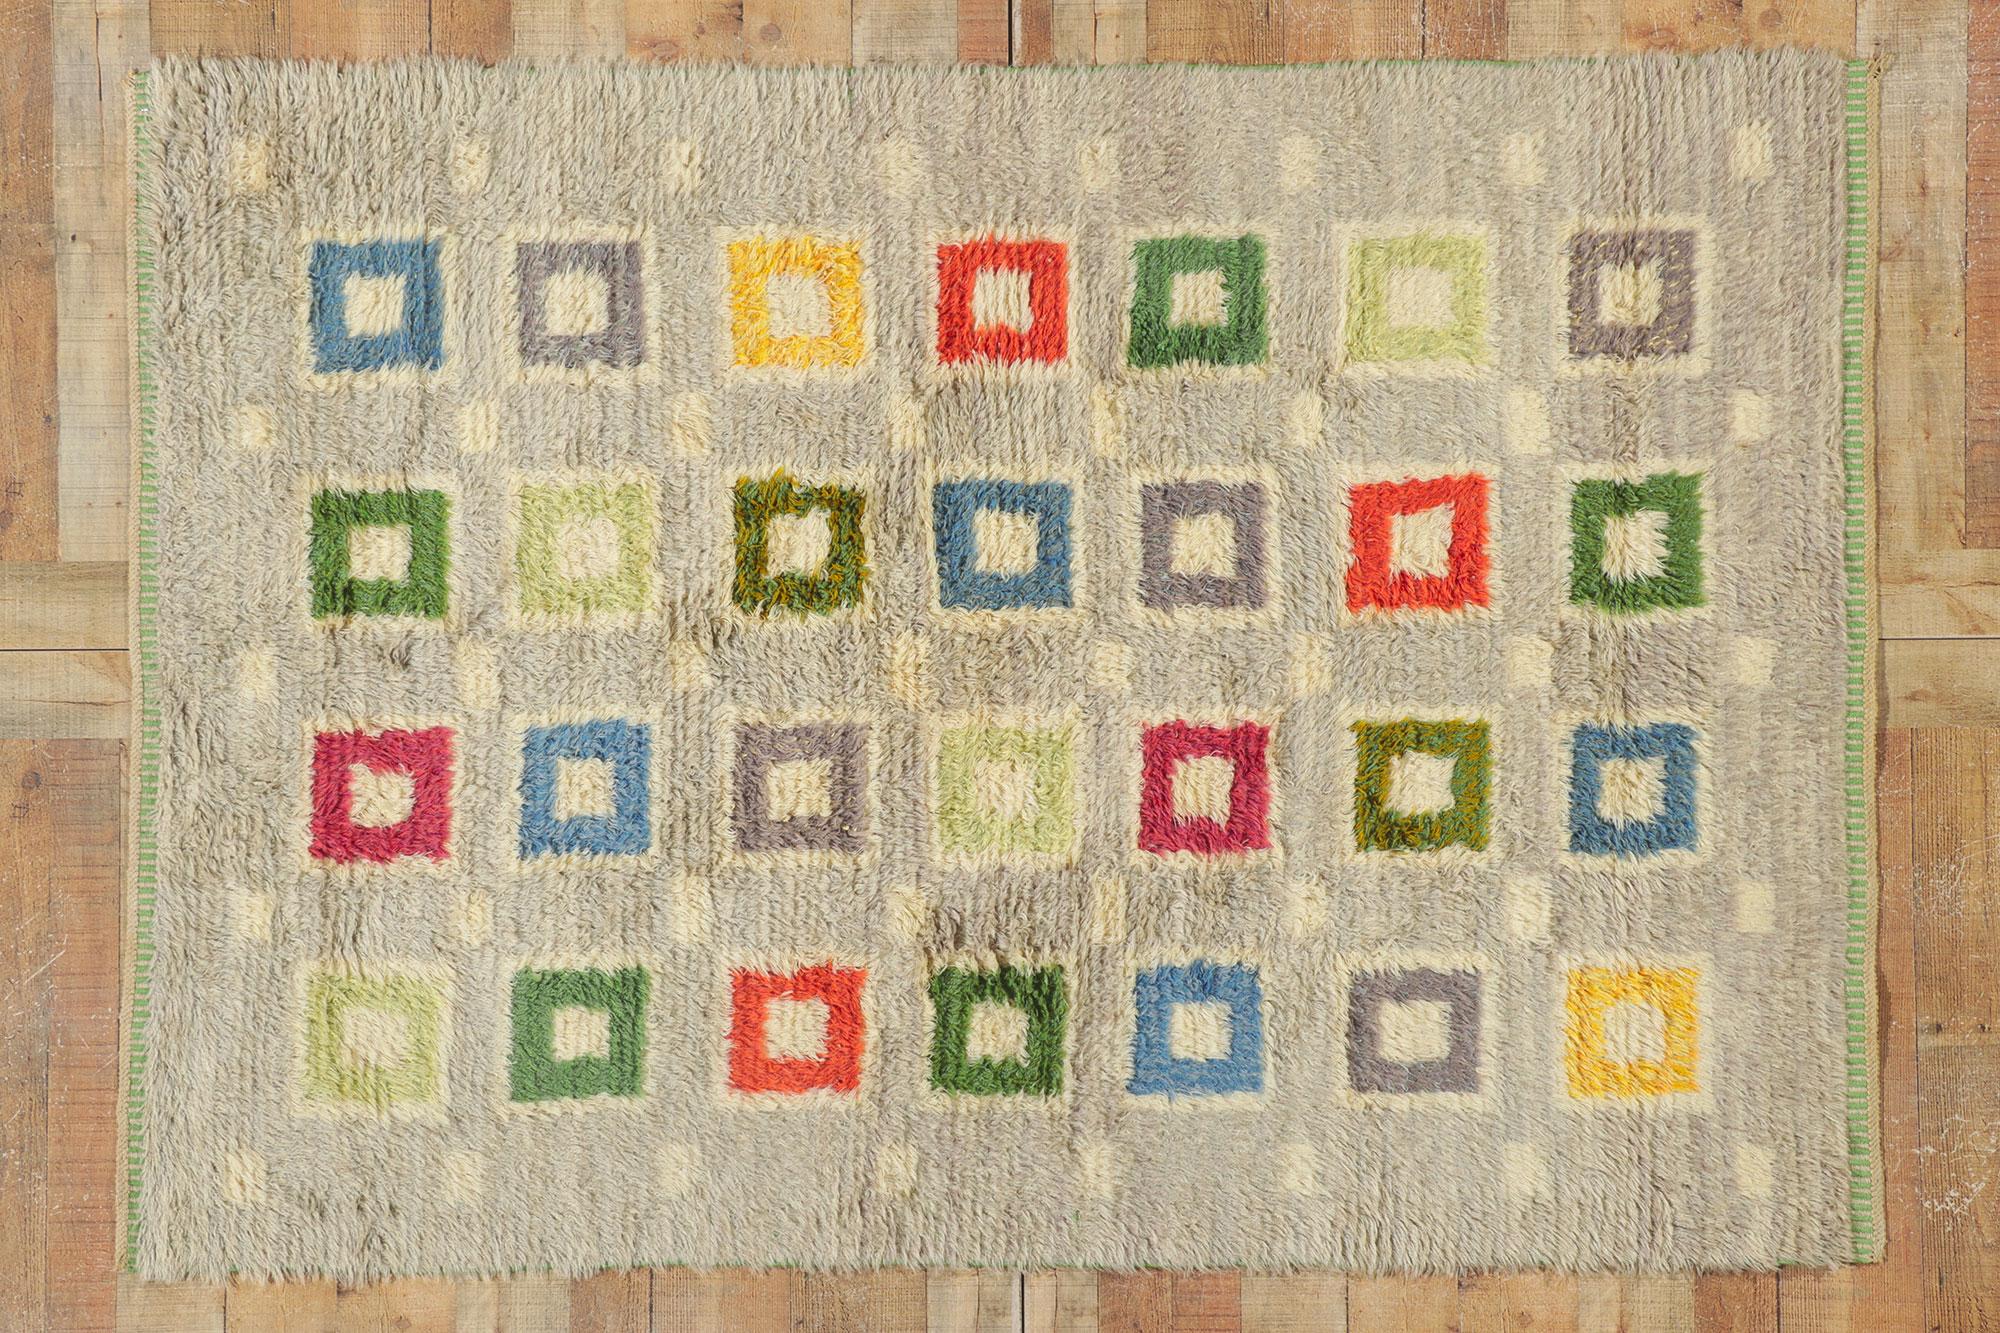 78508 Vintage Swedish Rya Rug, 04'08 x 06'06. Emanating Scandinavian Modern style with incredible detail and texture, this hand knotted Swedish rya rug is a captivating vision of woven beauty. The eye-catching checkerboard pattern and happy color